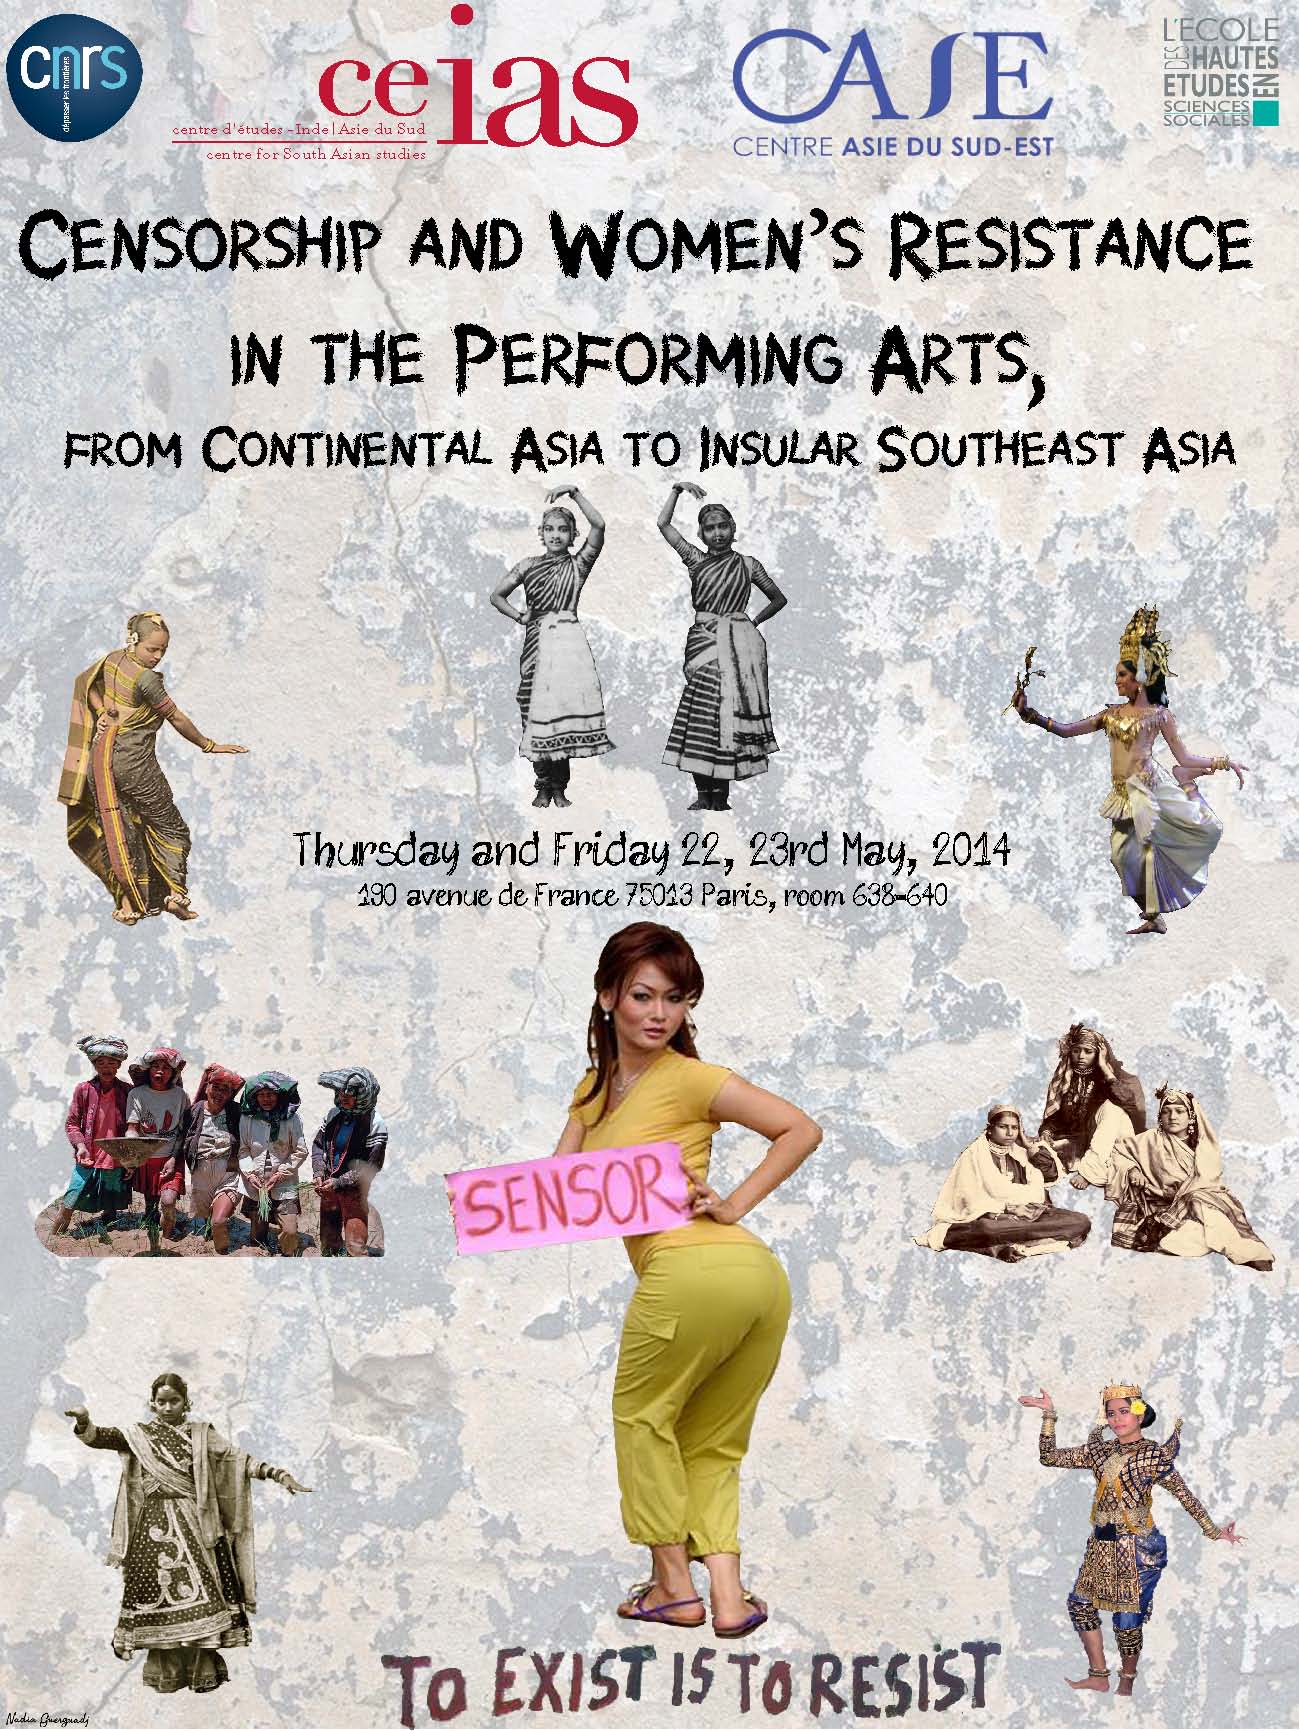 Censorship and Women's Resistance in the Performing Arts, from Continental Asia to Insular Southeast Asia